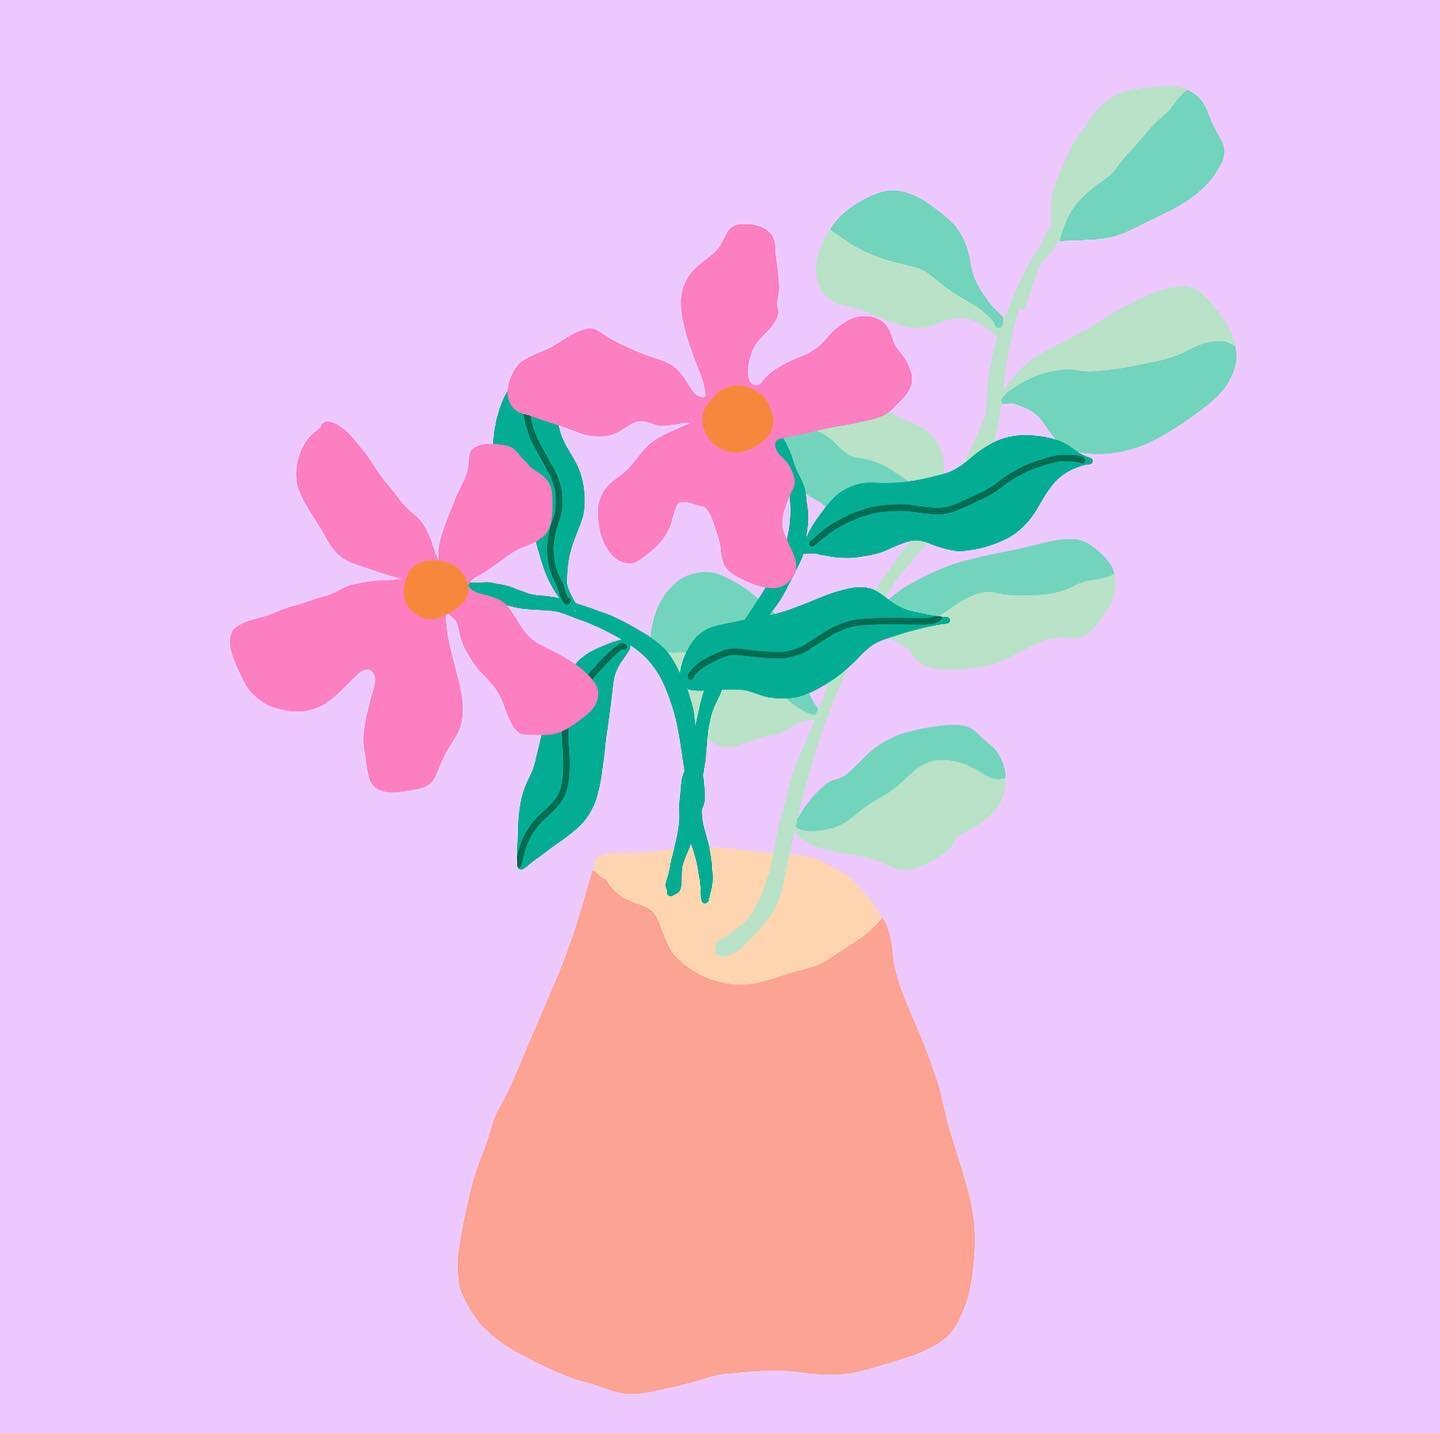 More flowers, these colours are perfection together 😍🌸💜

[ID: charmingly wobbly pink flowers with green leaves sit in front of a branch with two toned leaves in a pinky vase on a background of luscious lilac purple. Drawn by the Dopamine Designer,